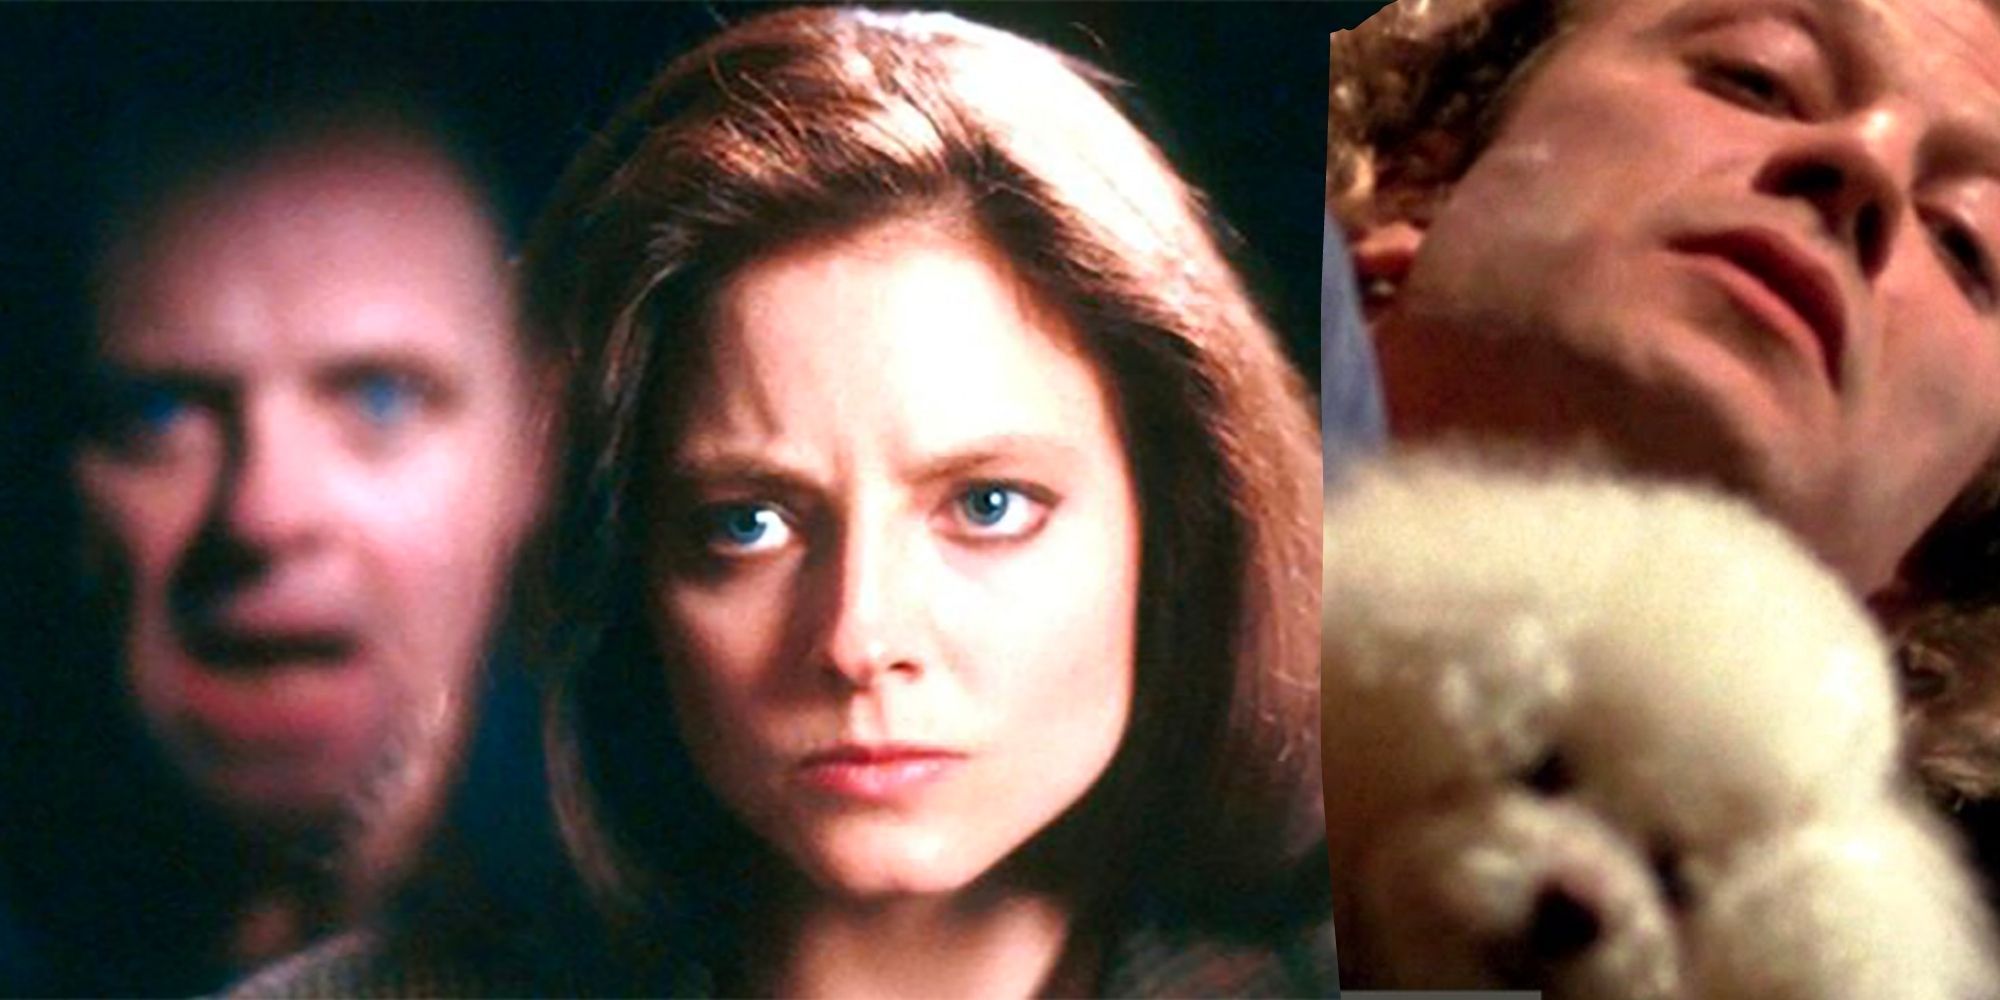 The Silence of the Lambs Jodie Foster as Clarice and Sir Anthony Hopkins as Hannibal Lecter next to Ted Levine as Buffalo Bill and his dog